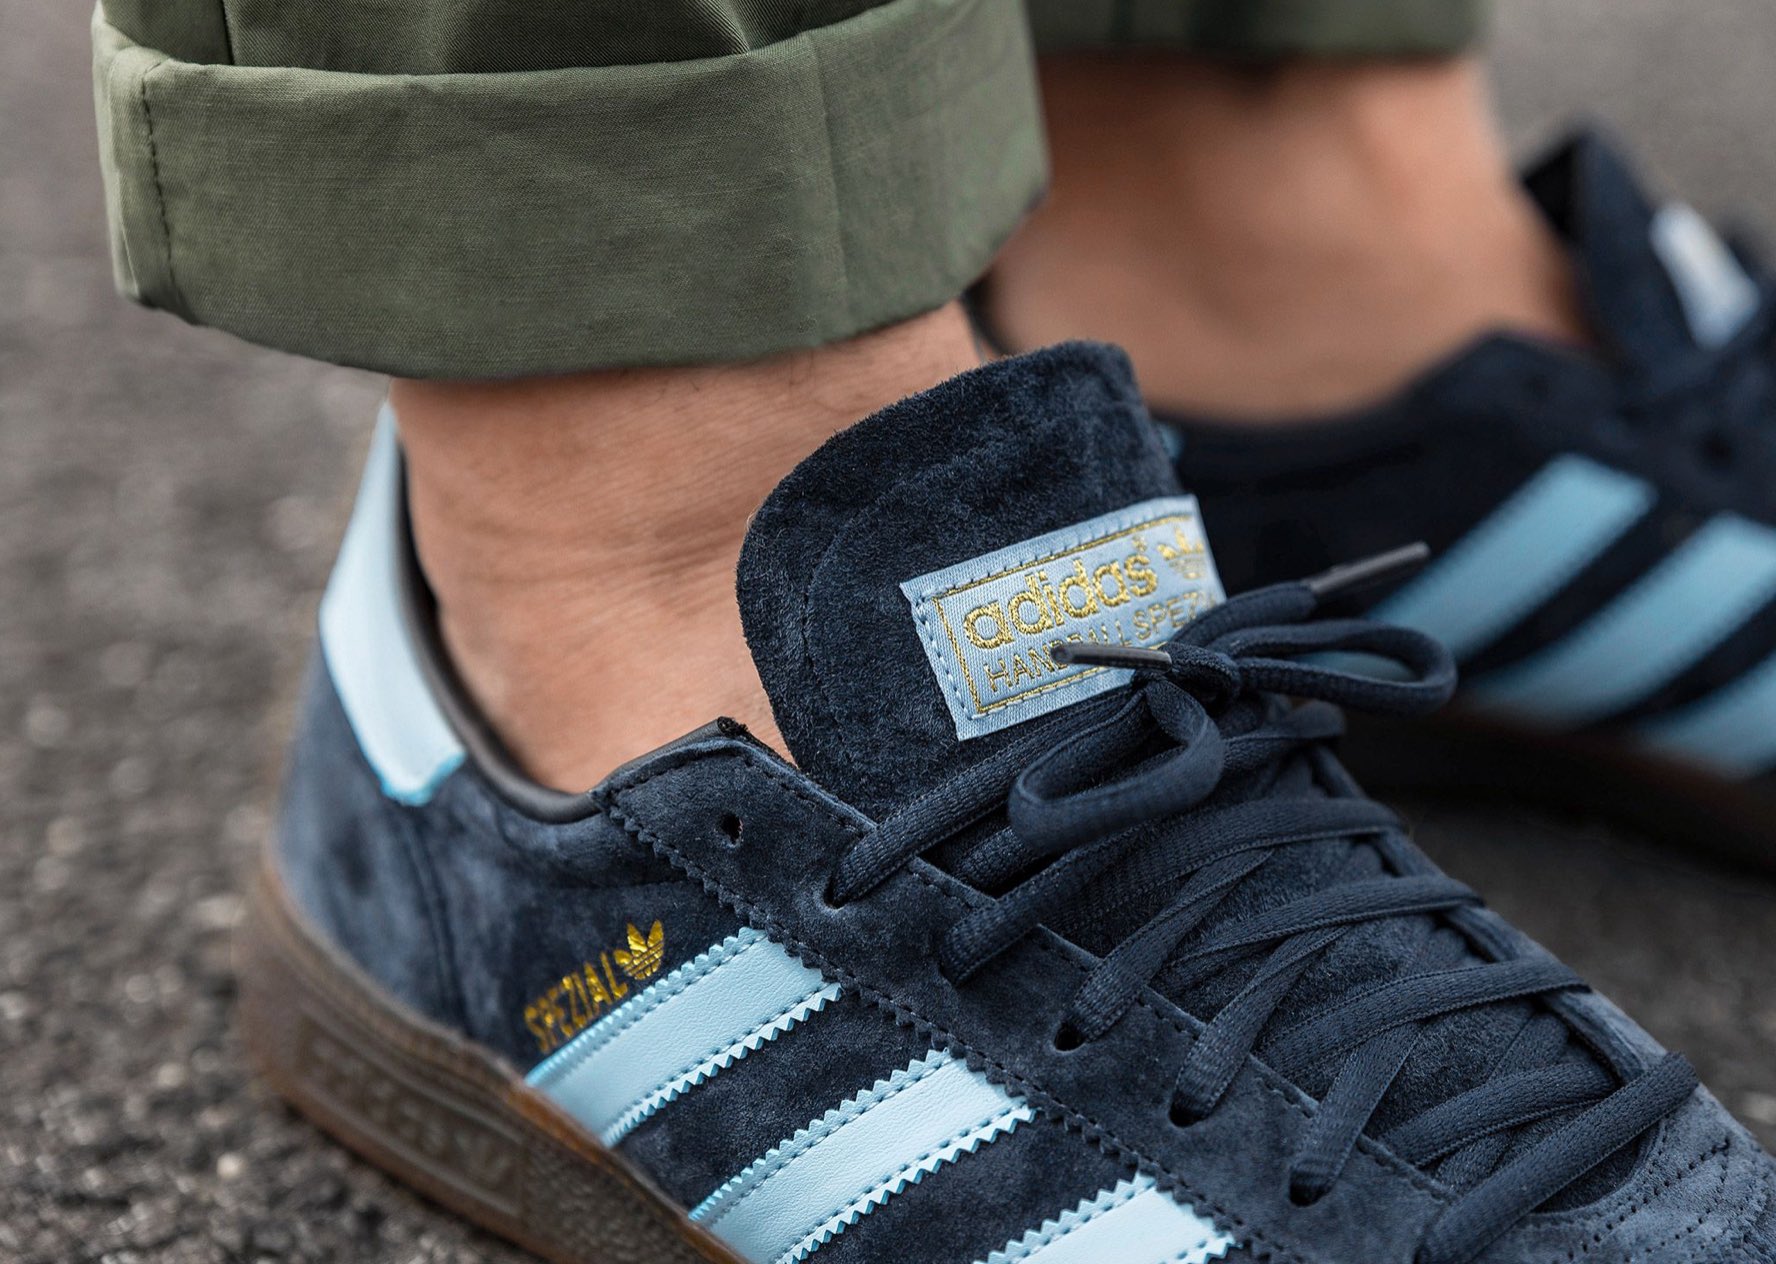 at straffe Permanent vride Sneaker Deals GB on Twitter: "Ad: The adidas Originals Handball Spezial  'Navy' just reduced to ONLY £48! Code “MAY20” here =&gt;  https://t.co/pFpsr4nfjv UK7-11 (RRP£75) https://t.co/hTXUY4CTZn" / Twitter